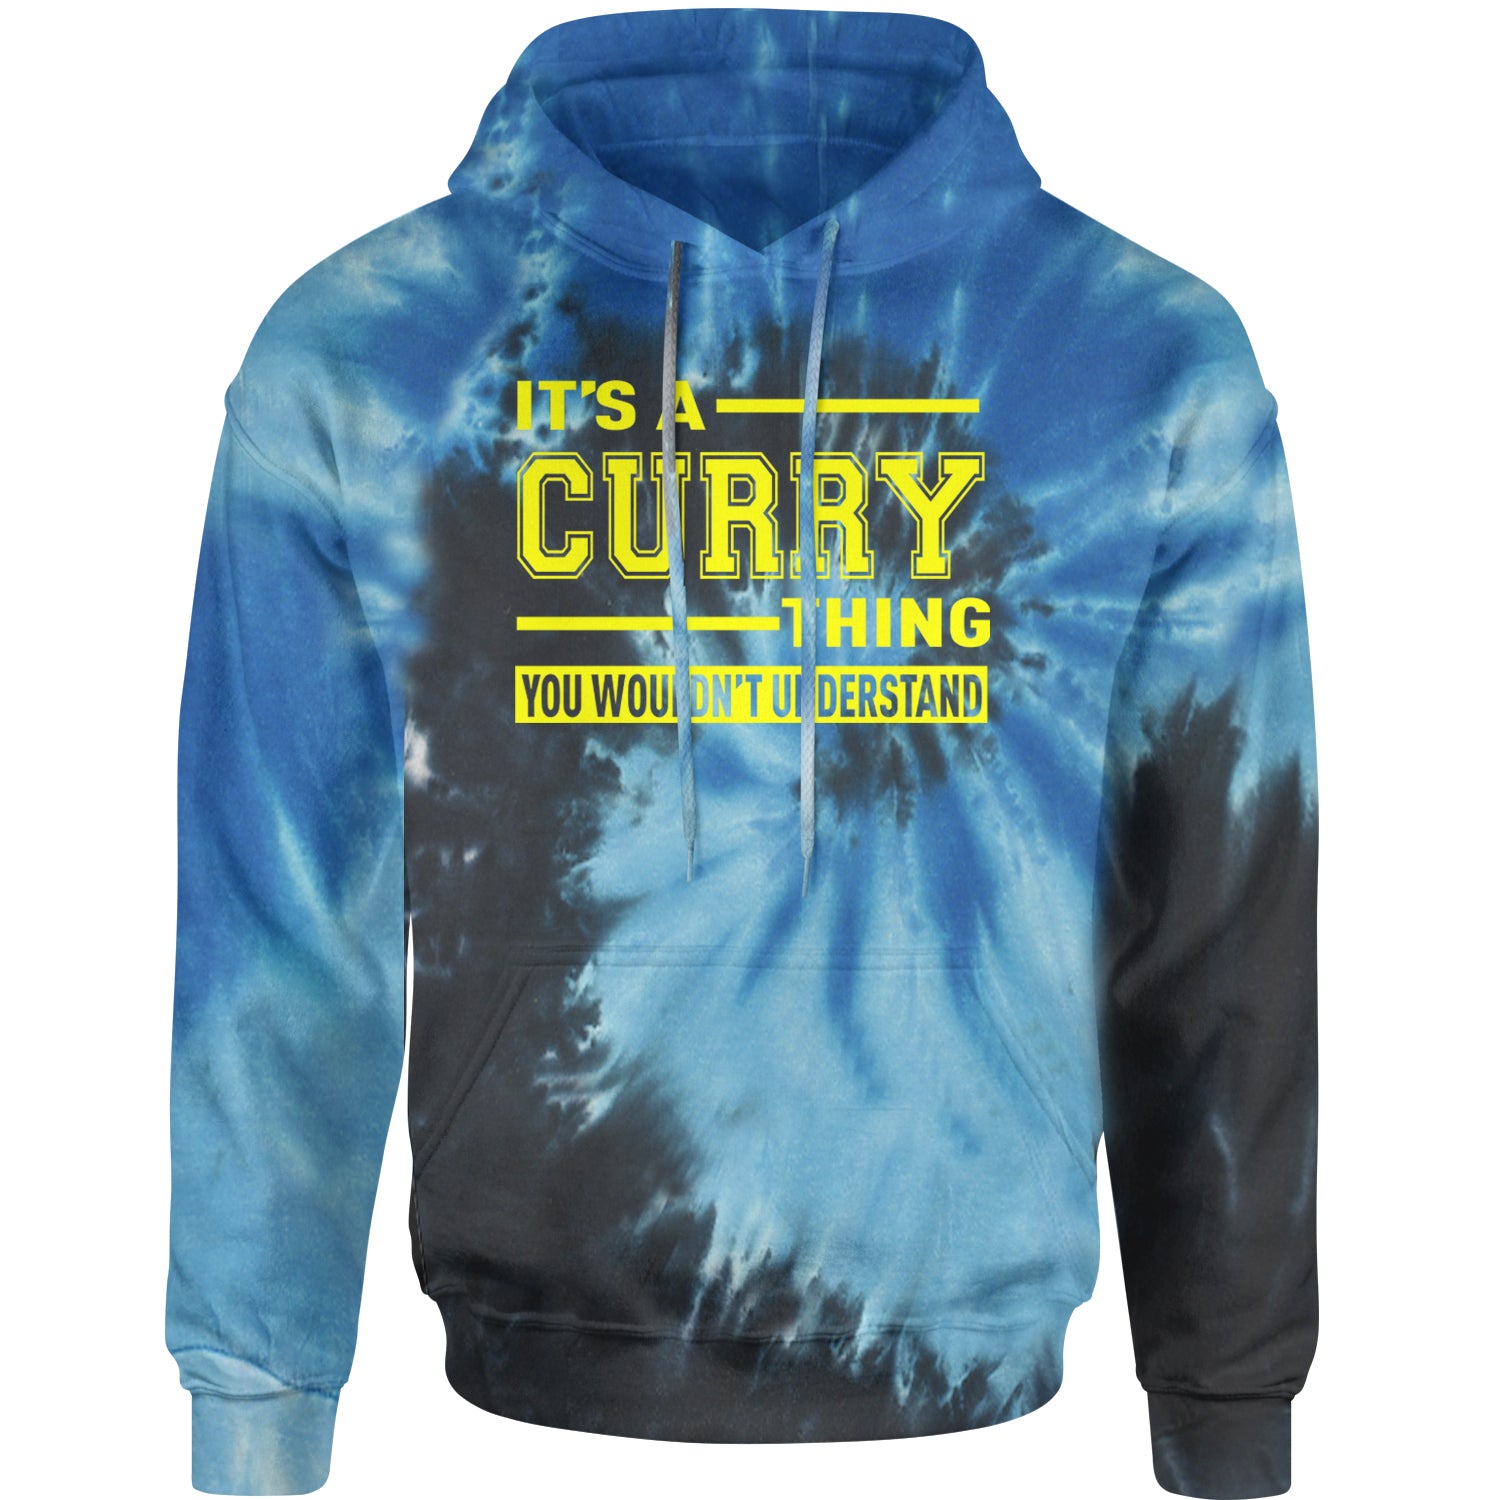 It's A Curry Thing, You Wouldn't Understand Basketball Adult Hoodie Sweatshirt